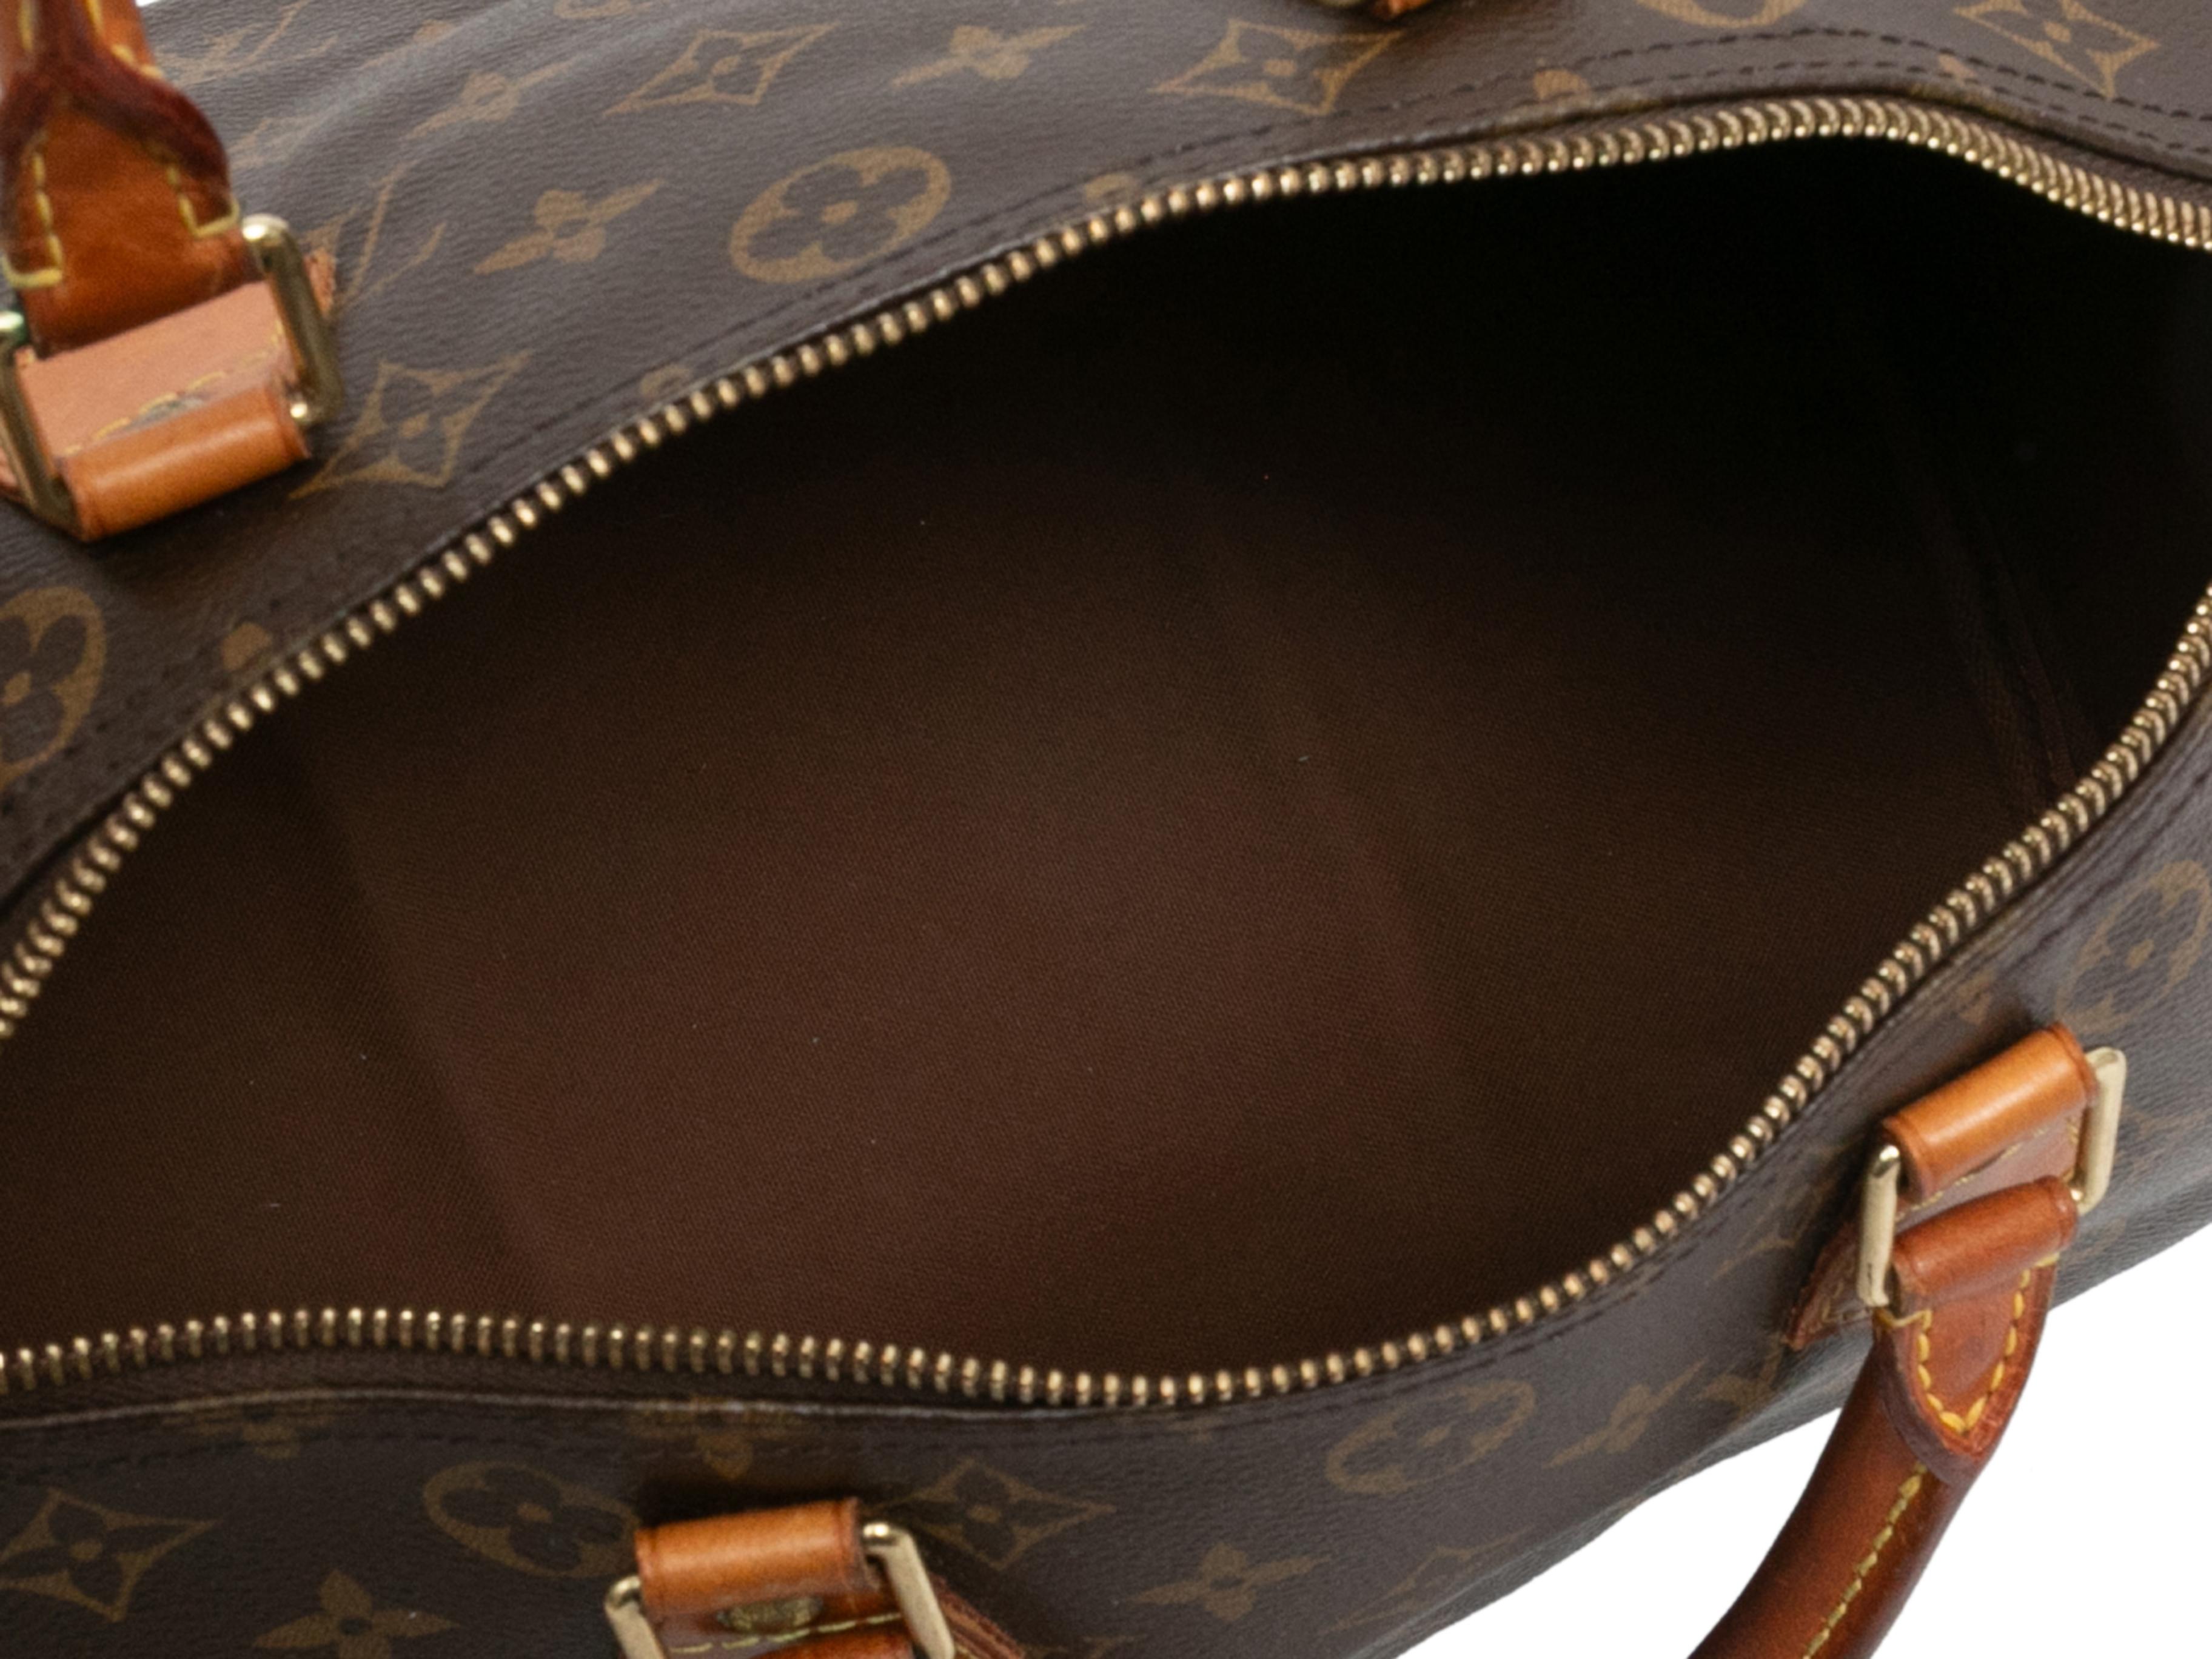 Brown Louis Vuitton Speedy 30 Handbag In Good Condition For Sale In New York, NY